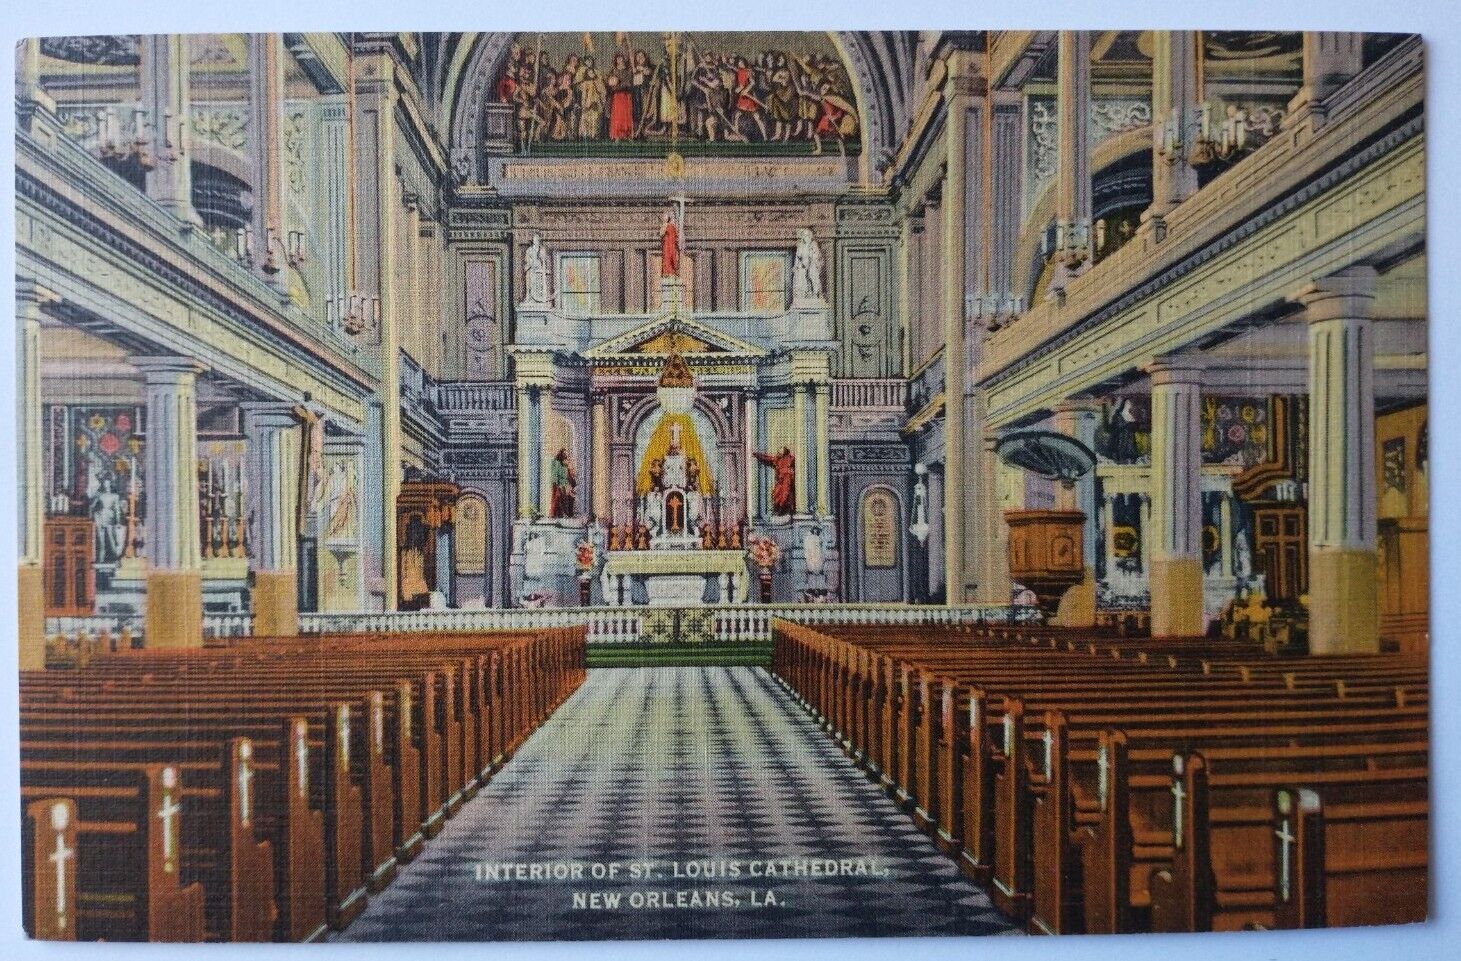 Interior of St. Louis Cathedral New Orleans Louisiana LA Linen Postcard 